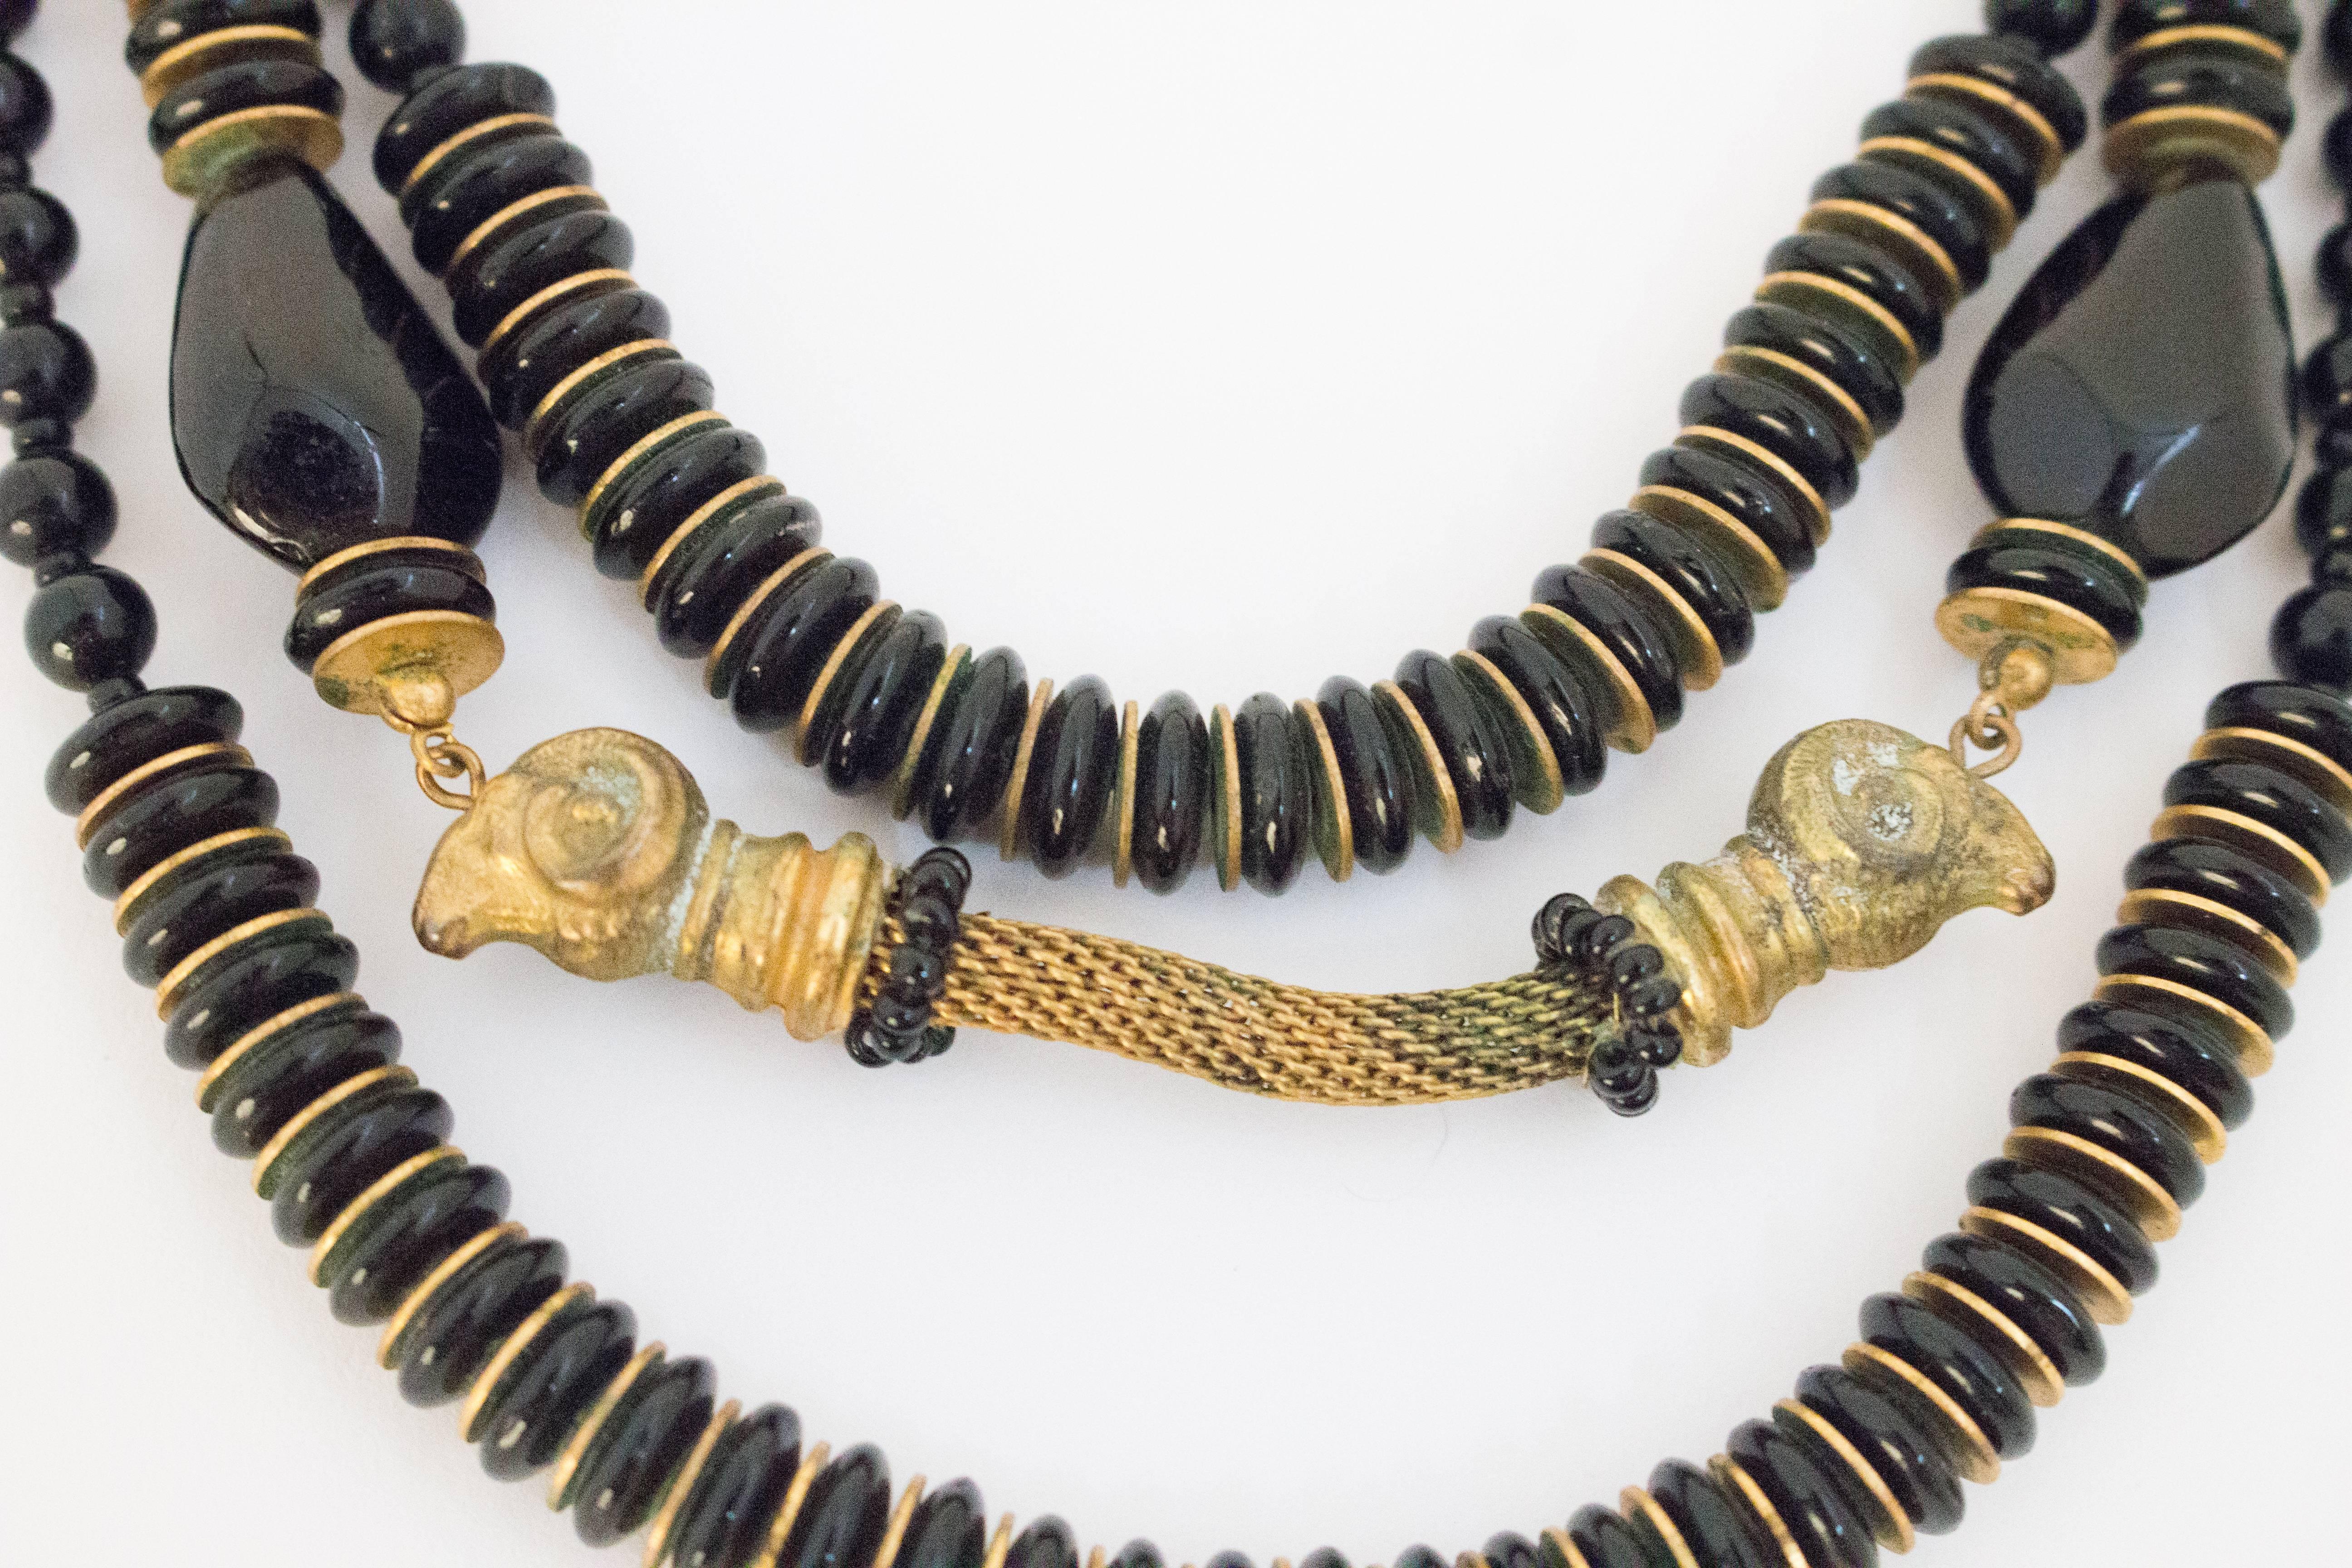 50s Miriam Haskell Black & Gold Ram Head Necklace. Original stamped clasp with wire beaded flower adornment. 

